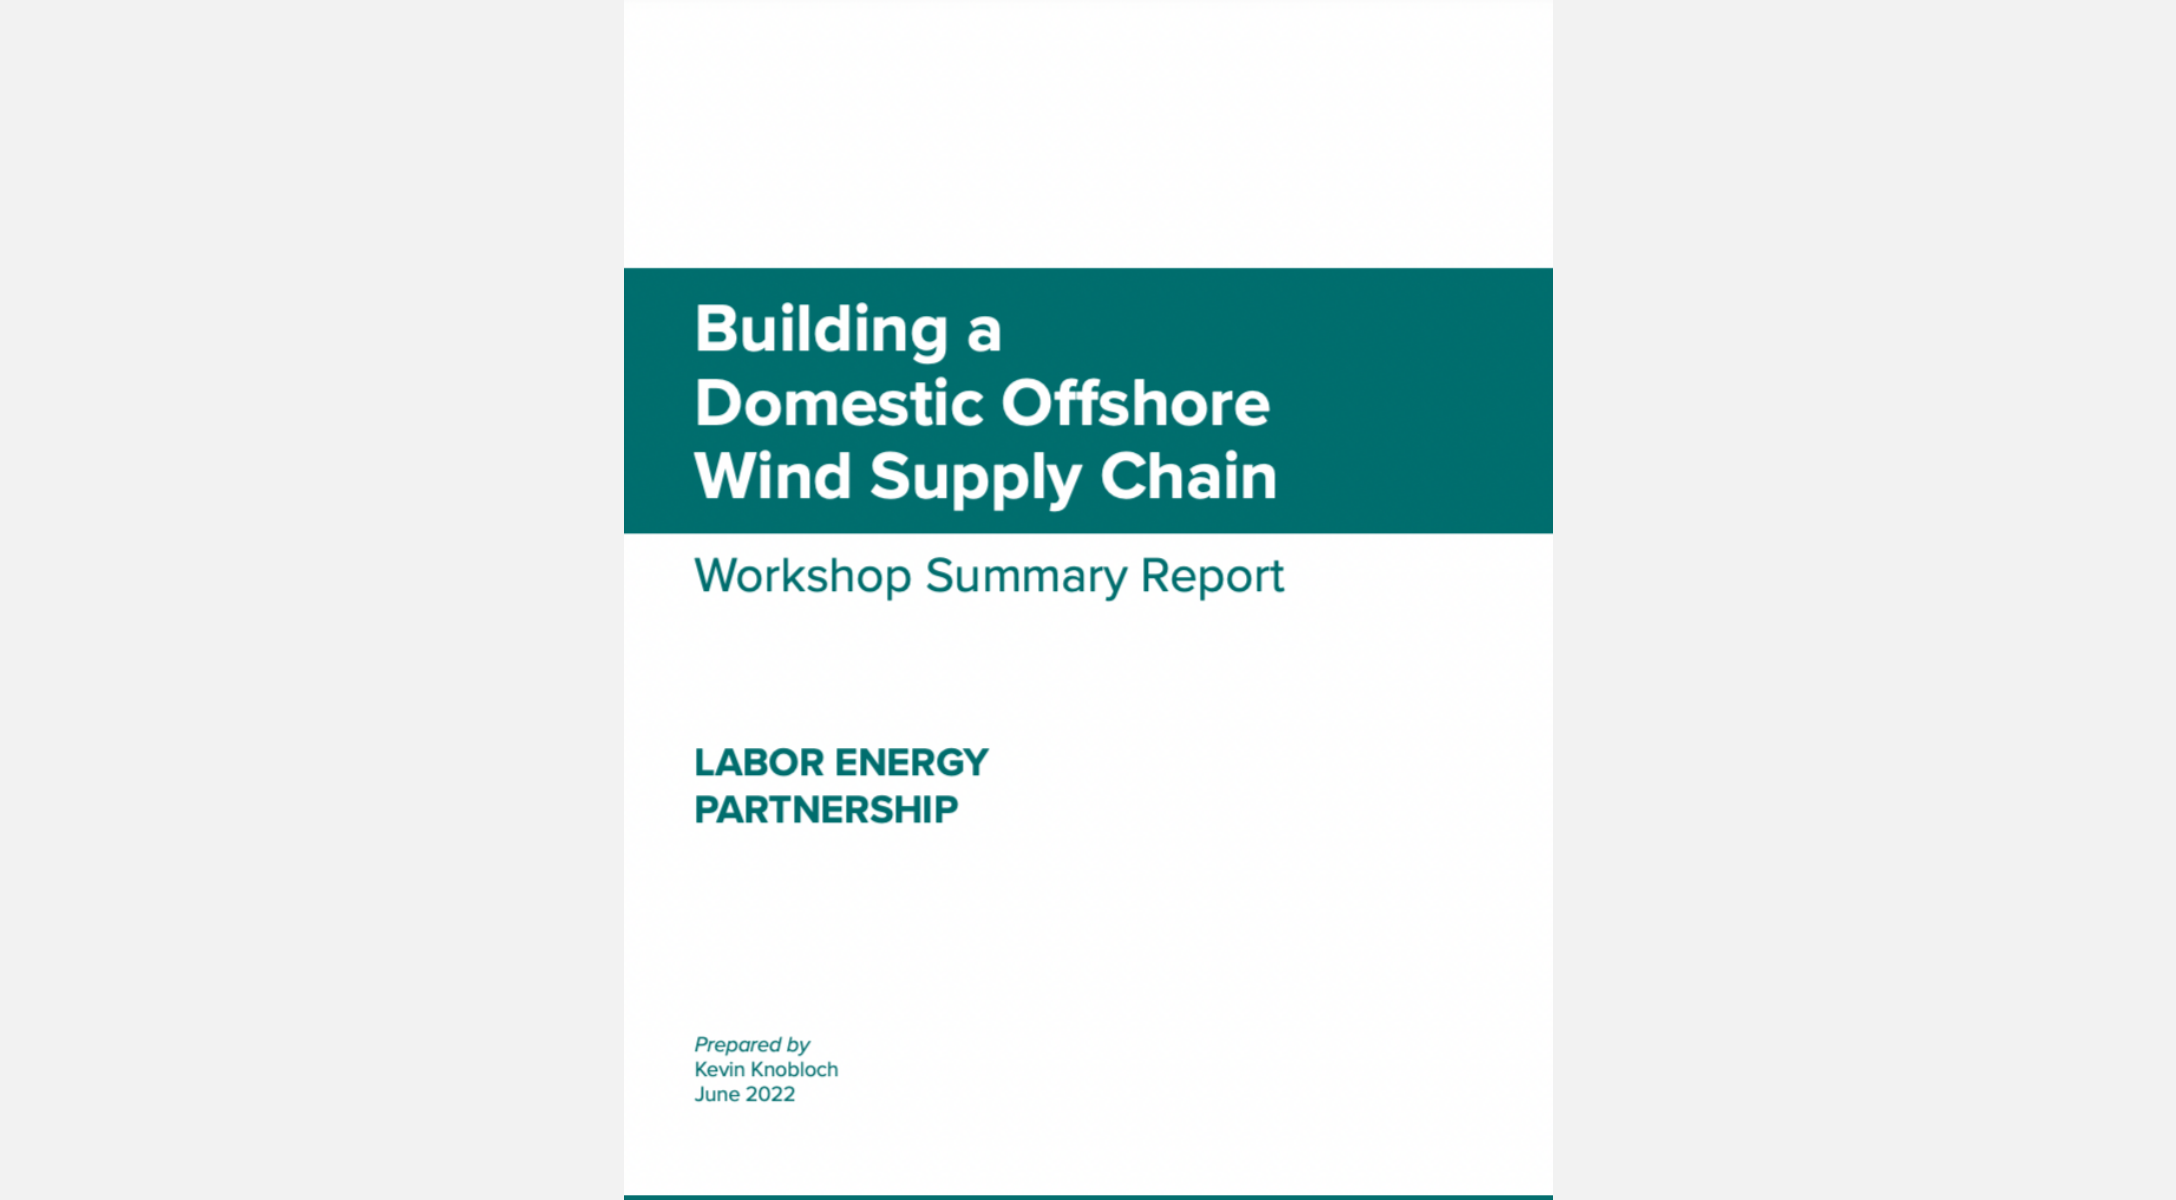 Building a Domestic Offshore Wind Supply Chain Workshop Summary Report